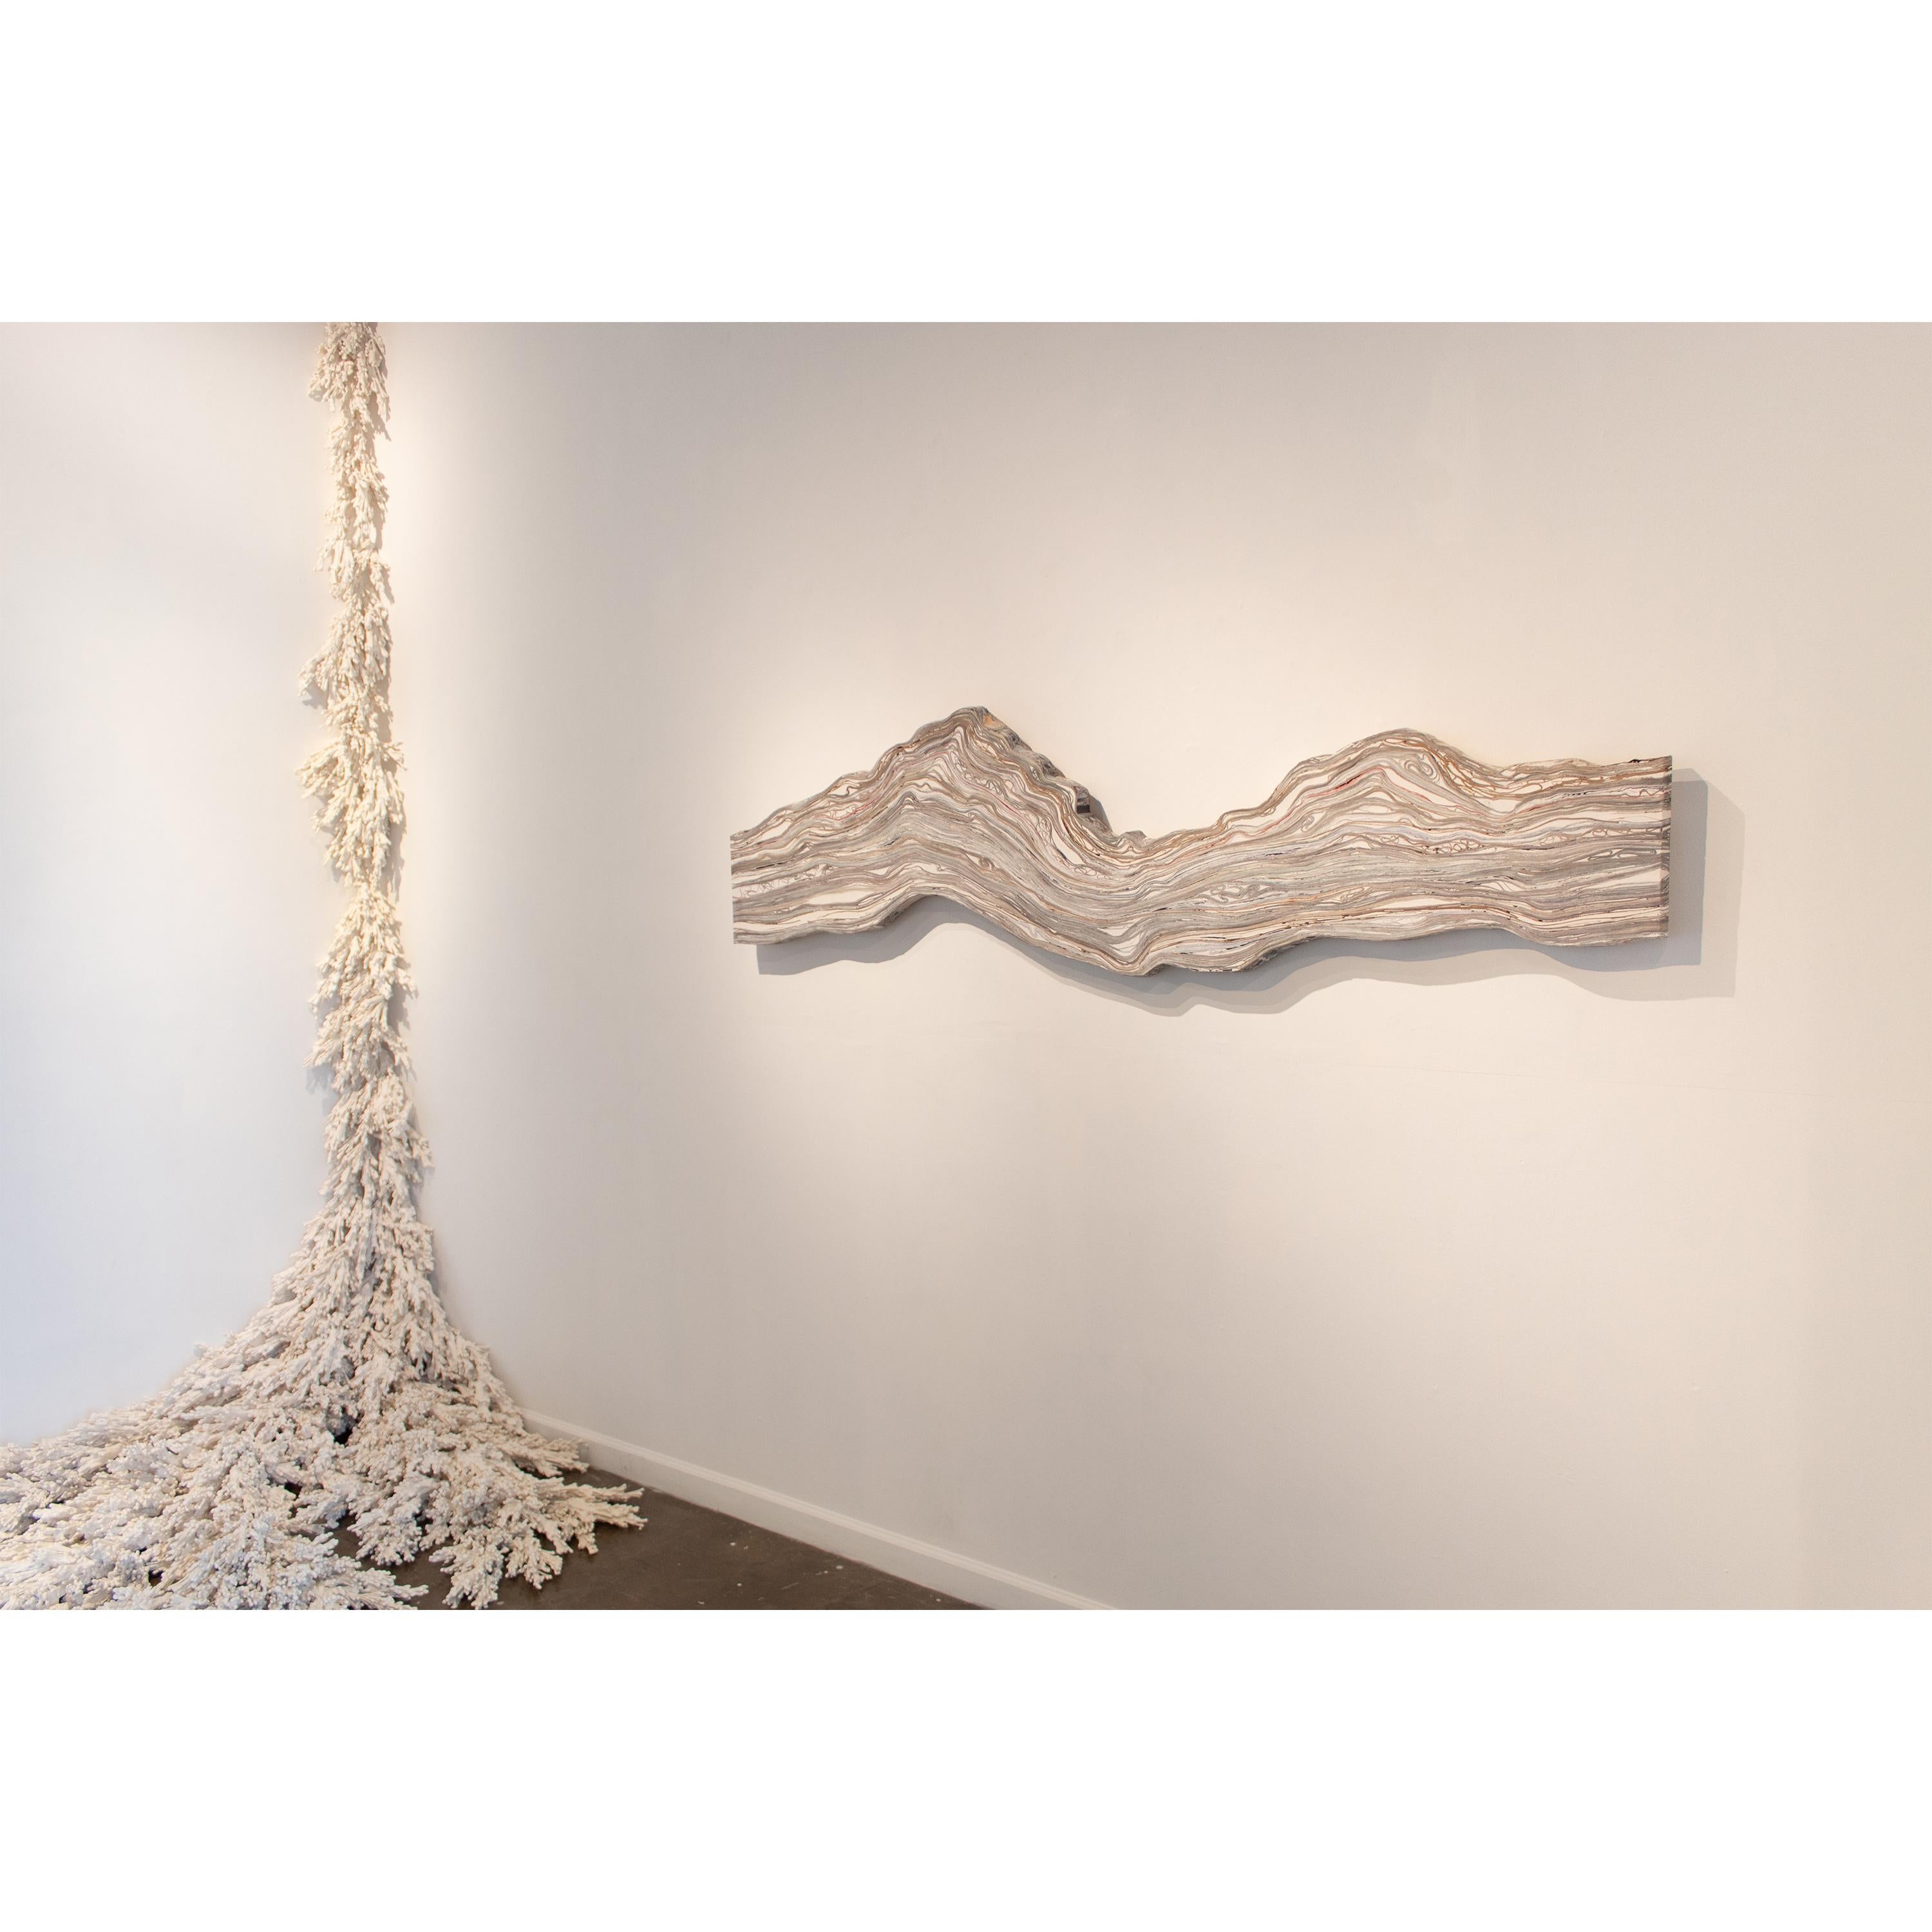 Dendrite - Gray Abstract Sculpture by Jessica Drenk